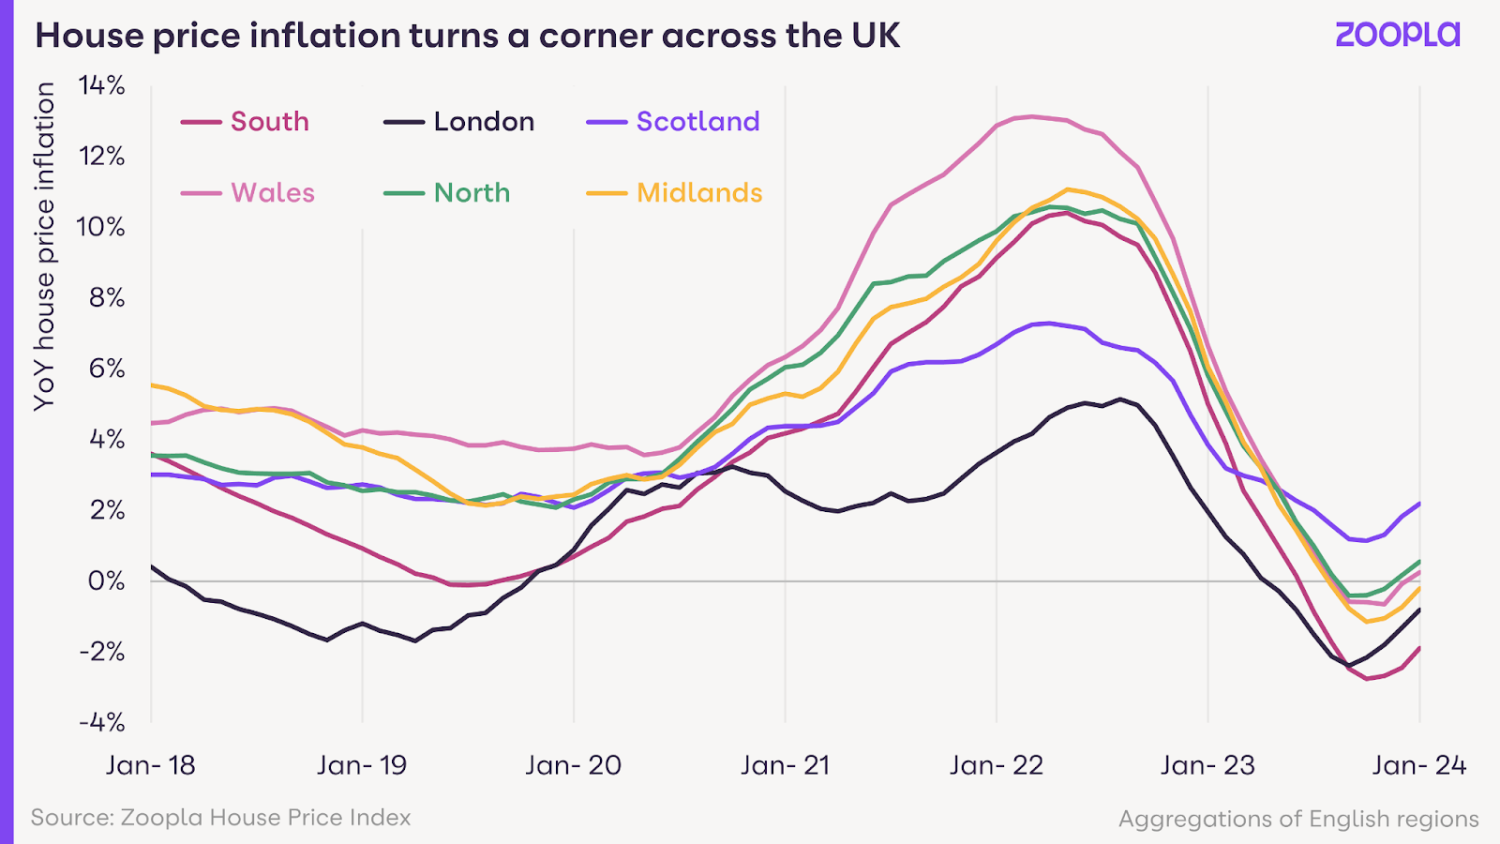 A graph showing that house price inflation turns a corner across the UK